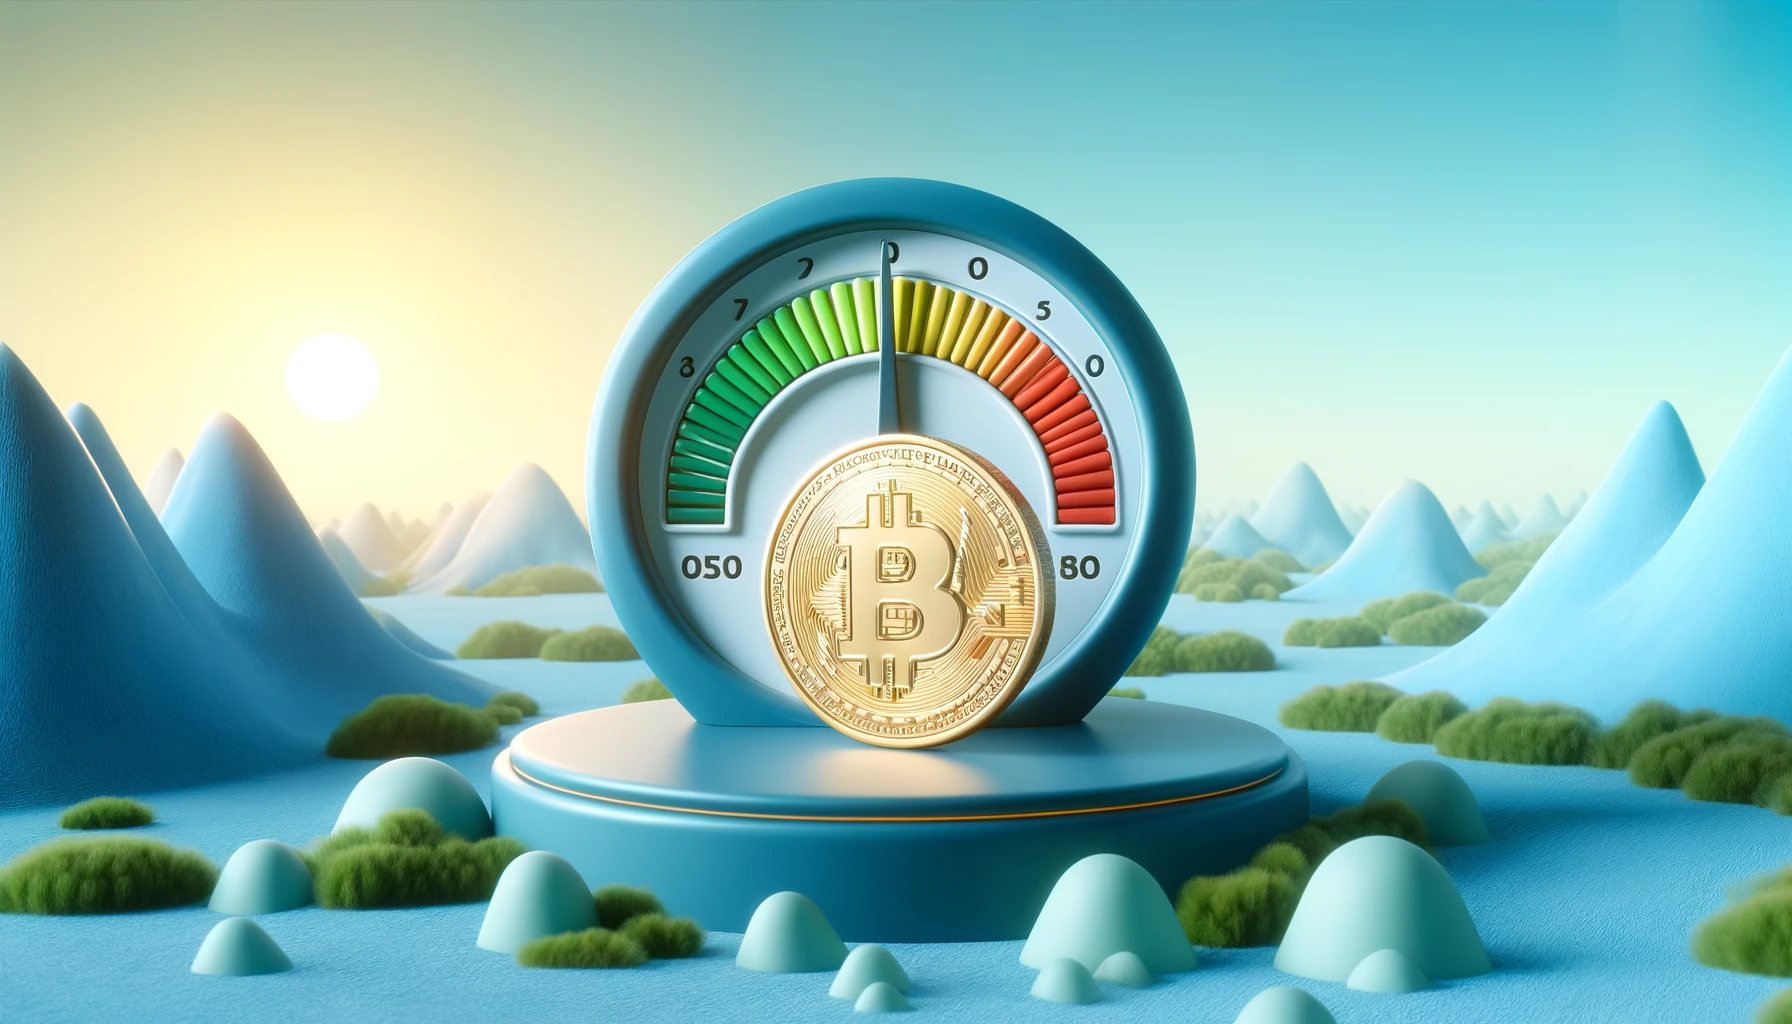 Is Bitcoin Overheated Right Now? This Metric Suggests No